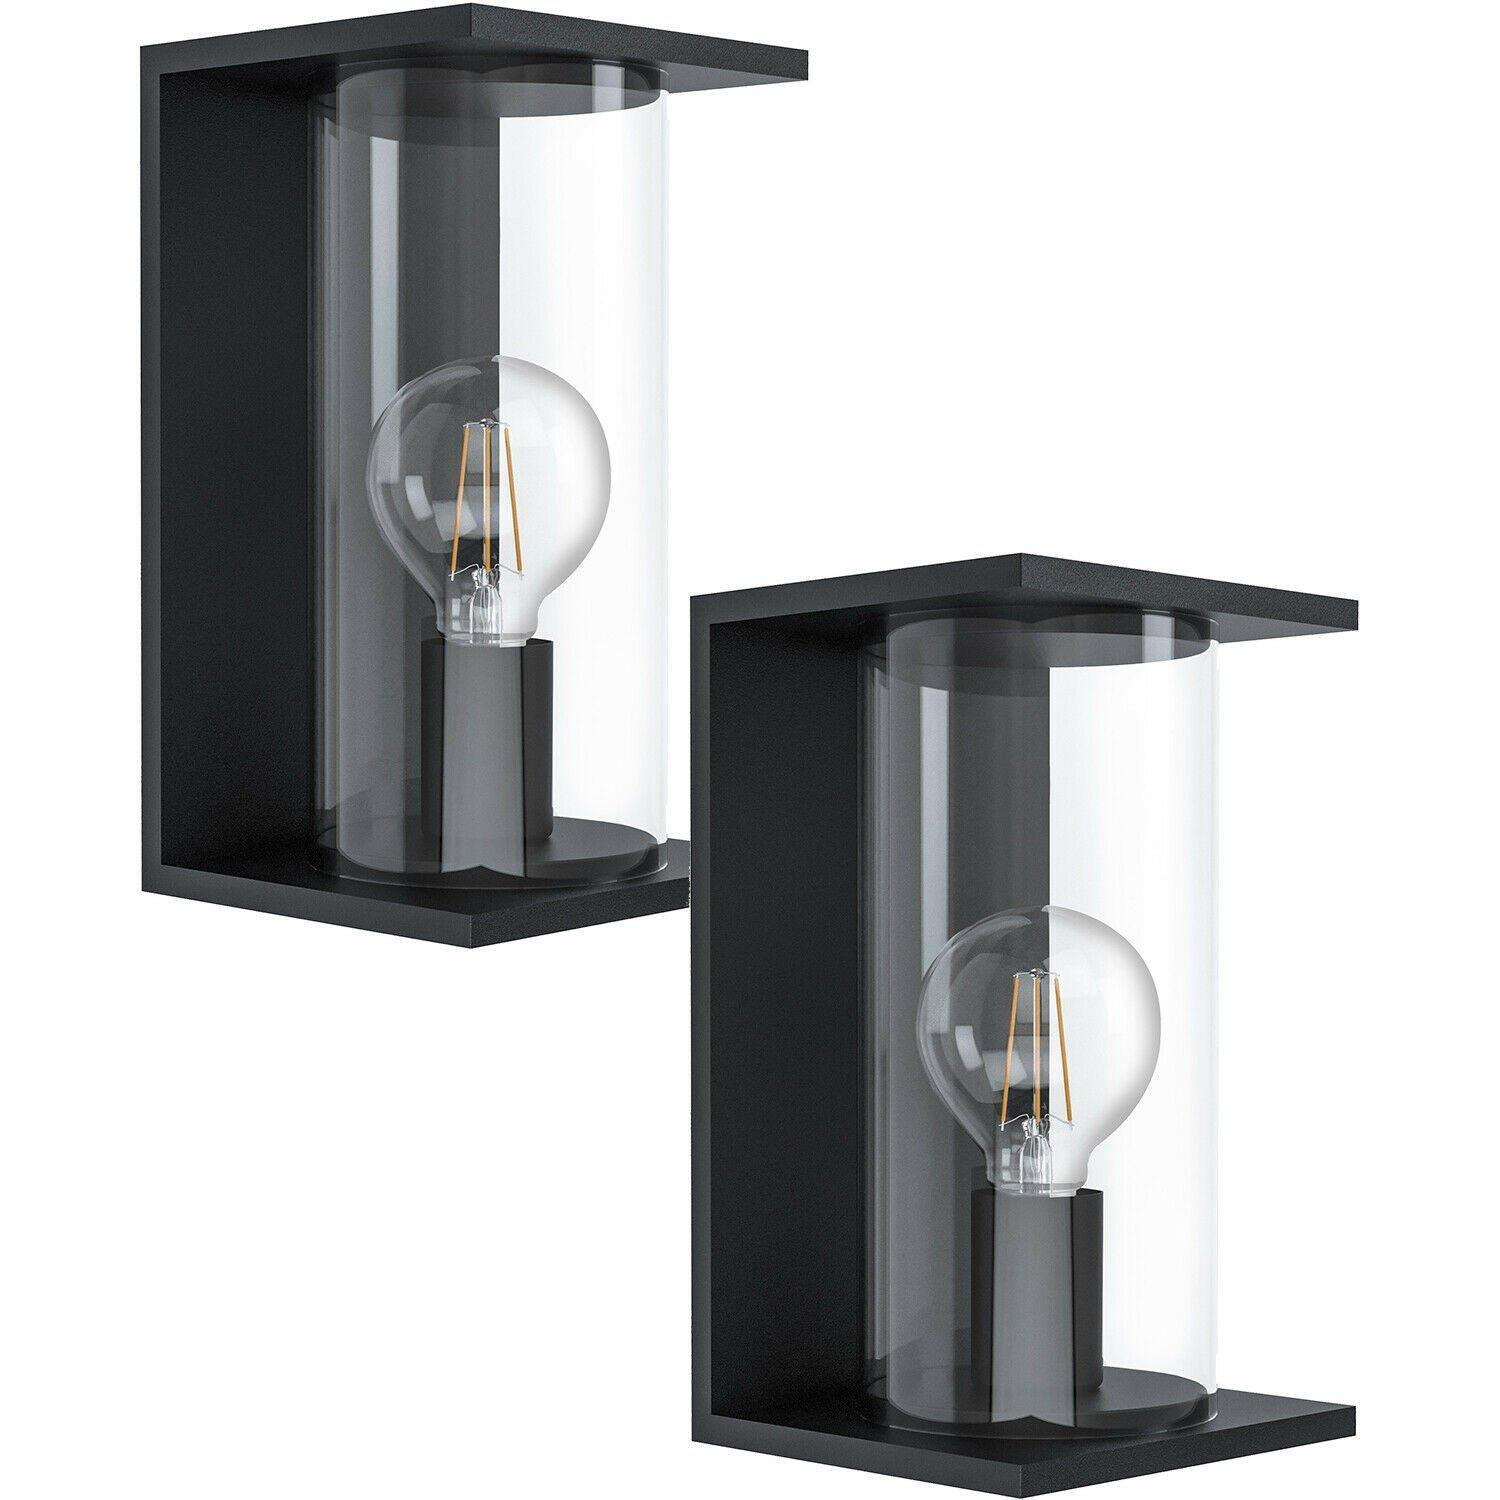 2 PACK IP54 Outdoor Wall Light Black Round Glass Lantern 40W E27 Porch Lamp - image 1